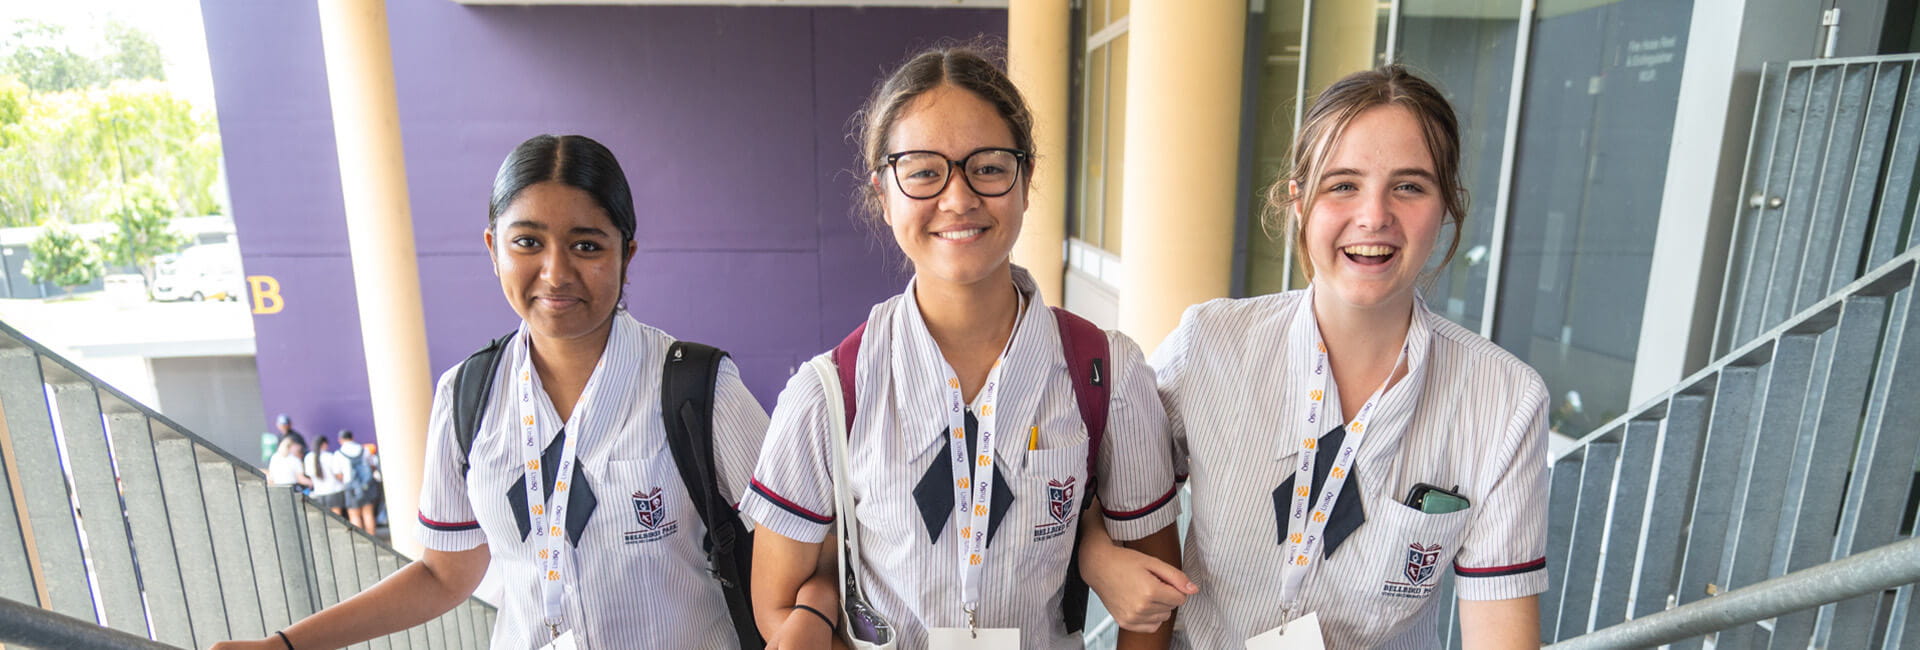 Three students in school uniforms are walking up a staircase, smiling and looking at the camera. 